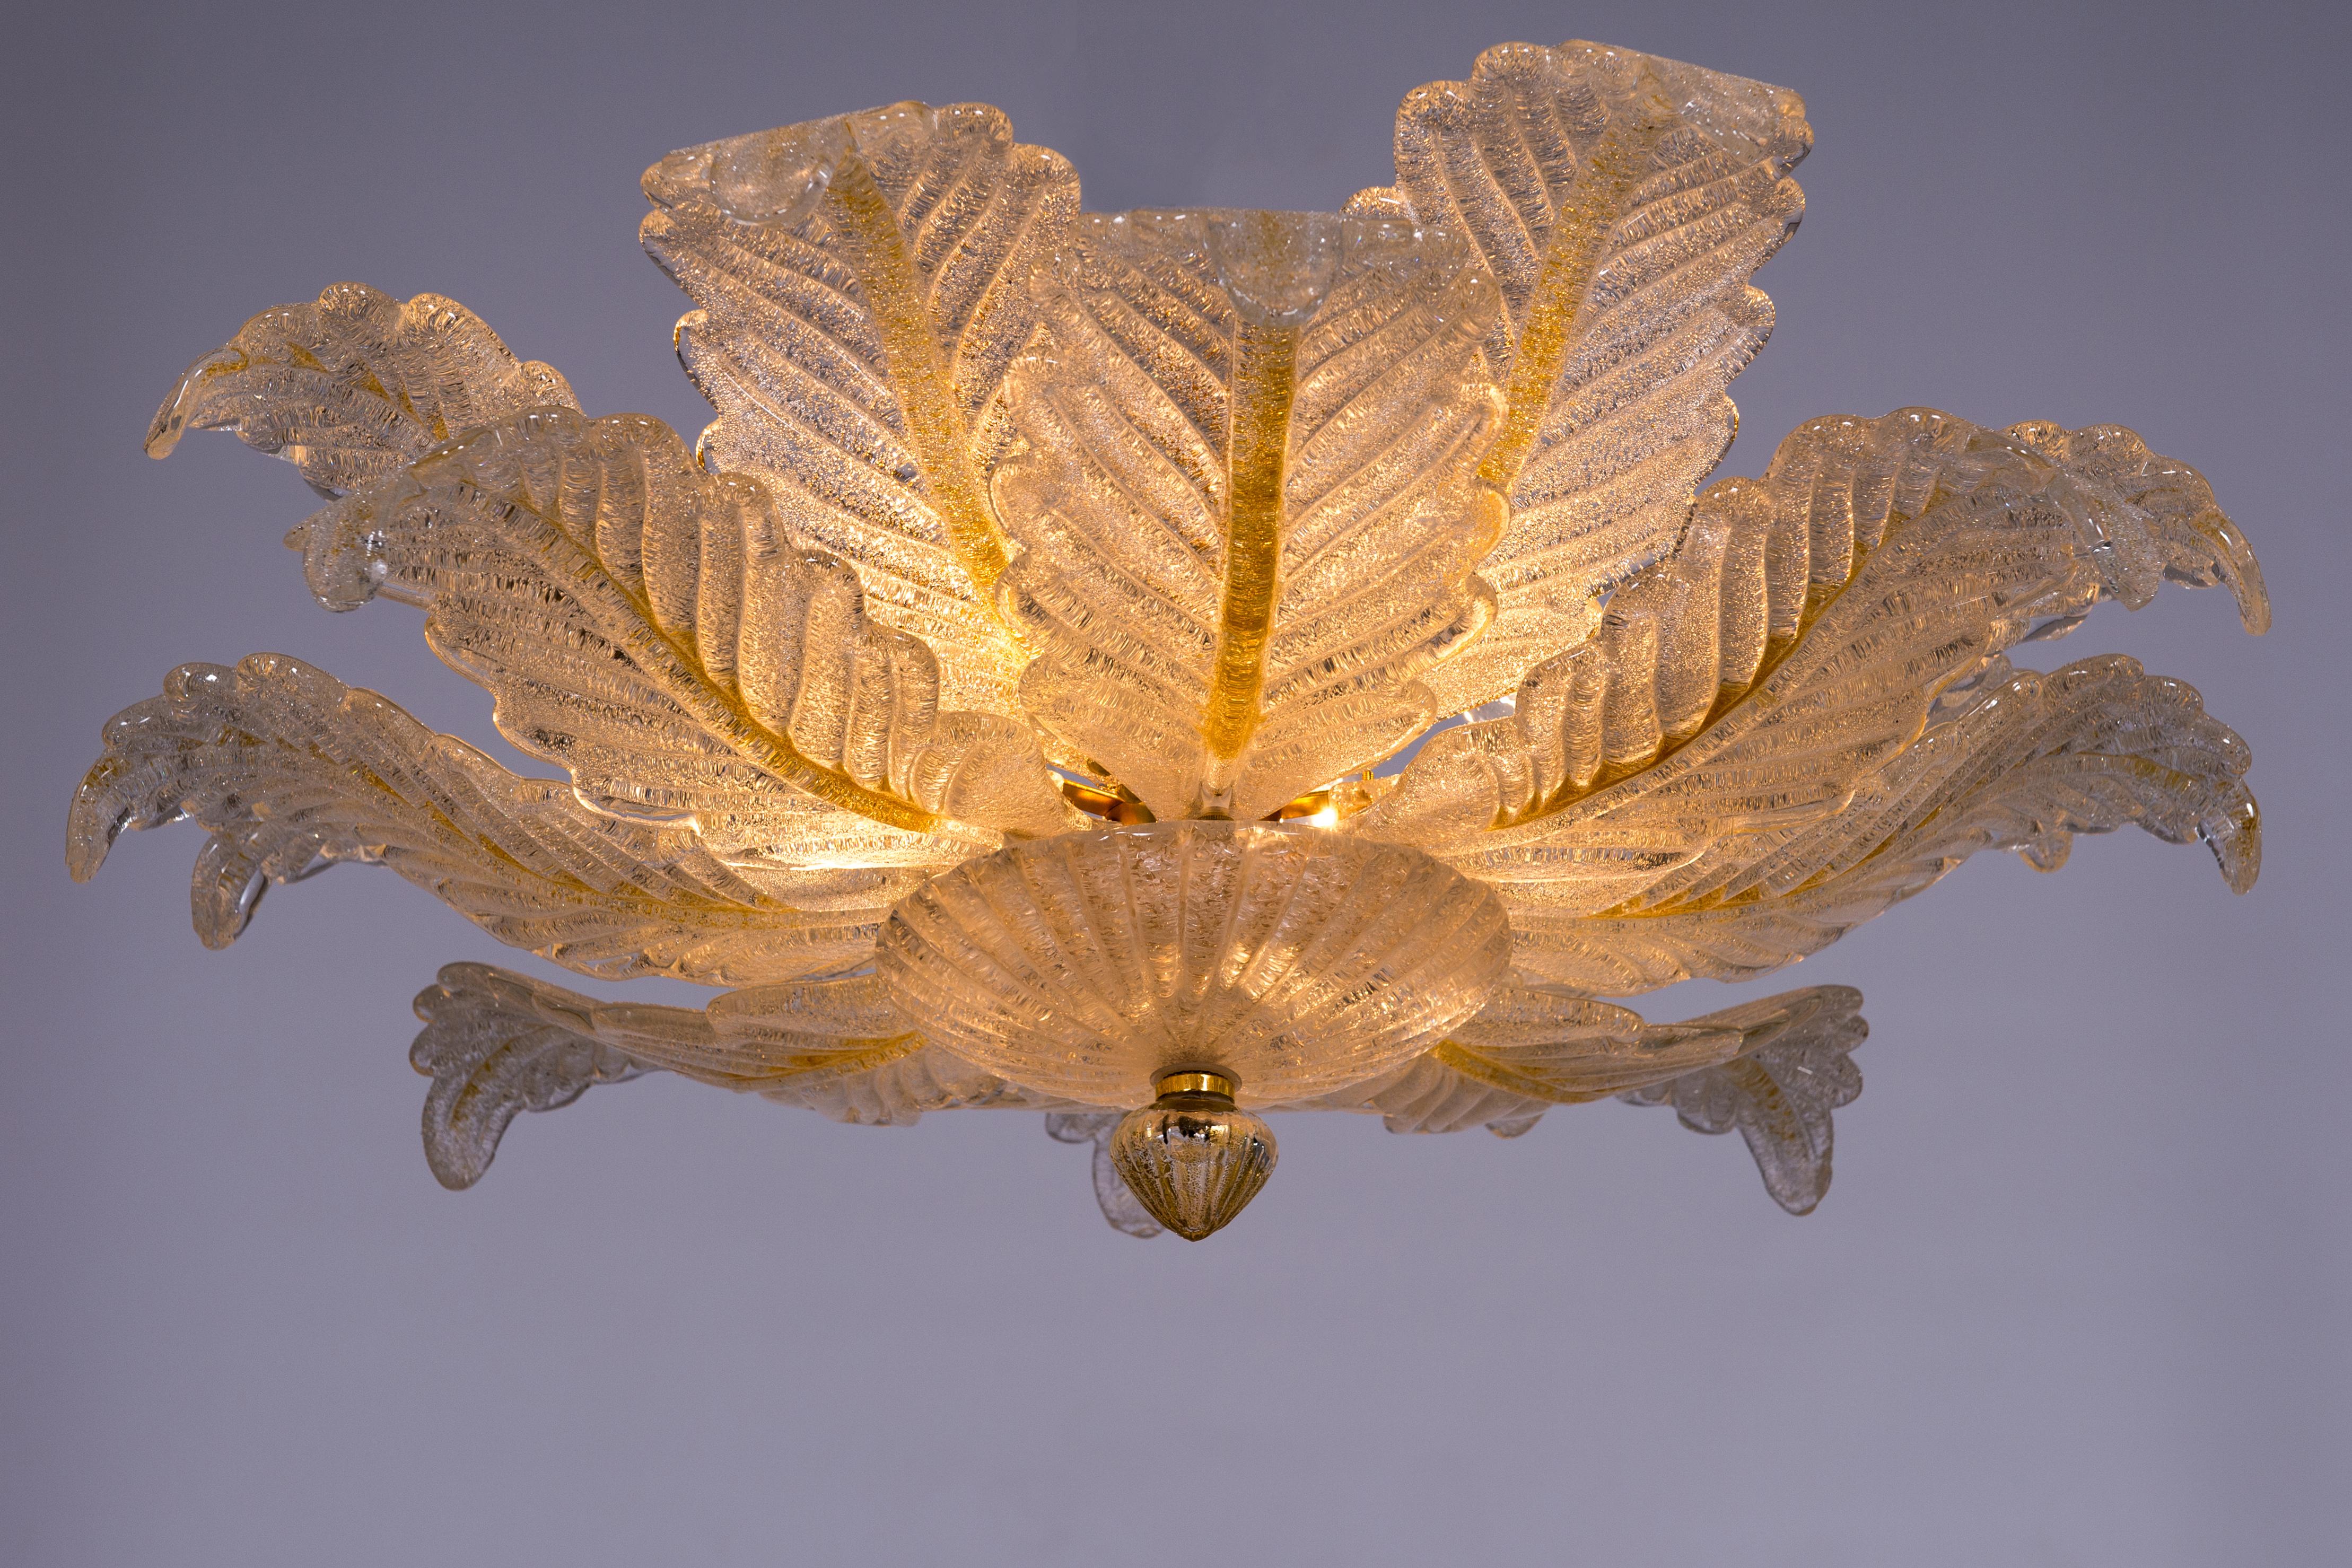 Grit Murano Glass Flush Mount in transparent color with amber finish Italy 1980s.
The flush mount is made of many glass leaves with herringbone patterns and an amber soul. The leaves are positioned in a way that seems to resemble many hands reaching